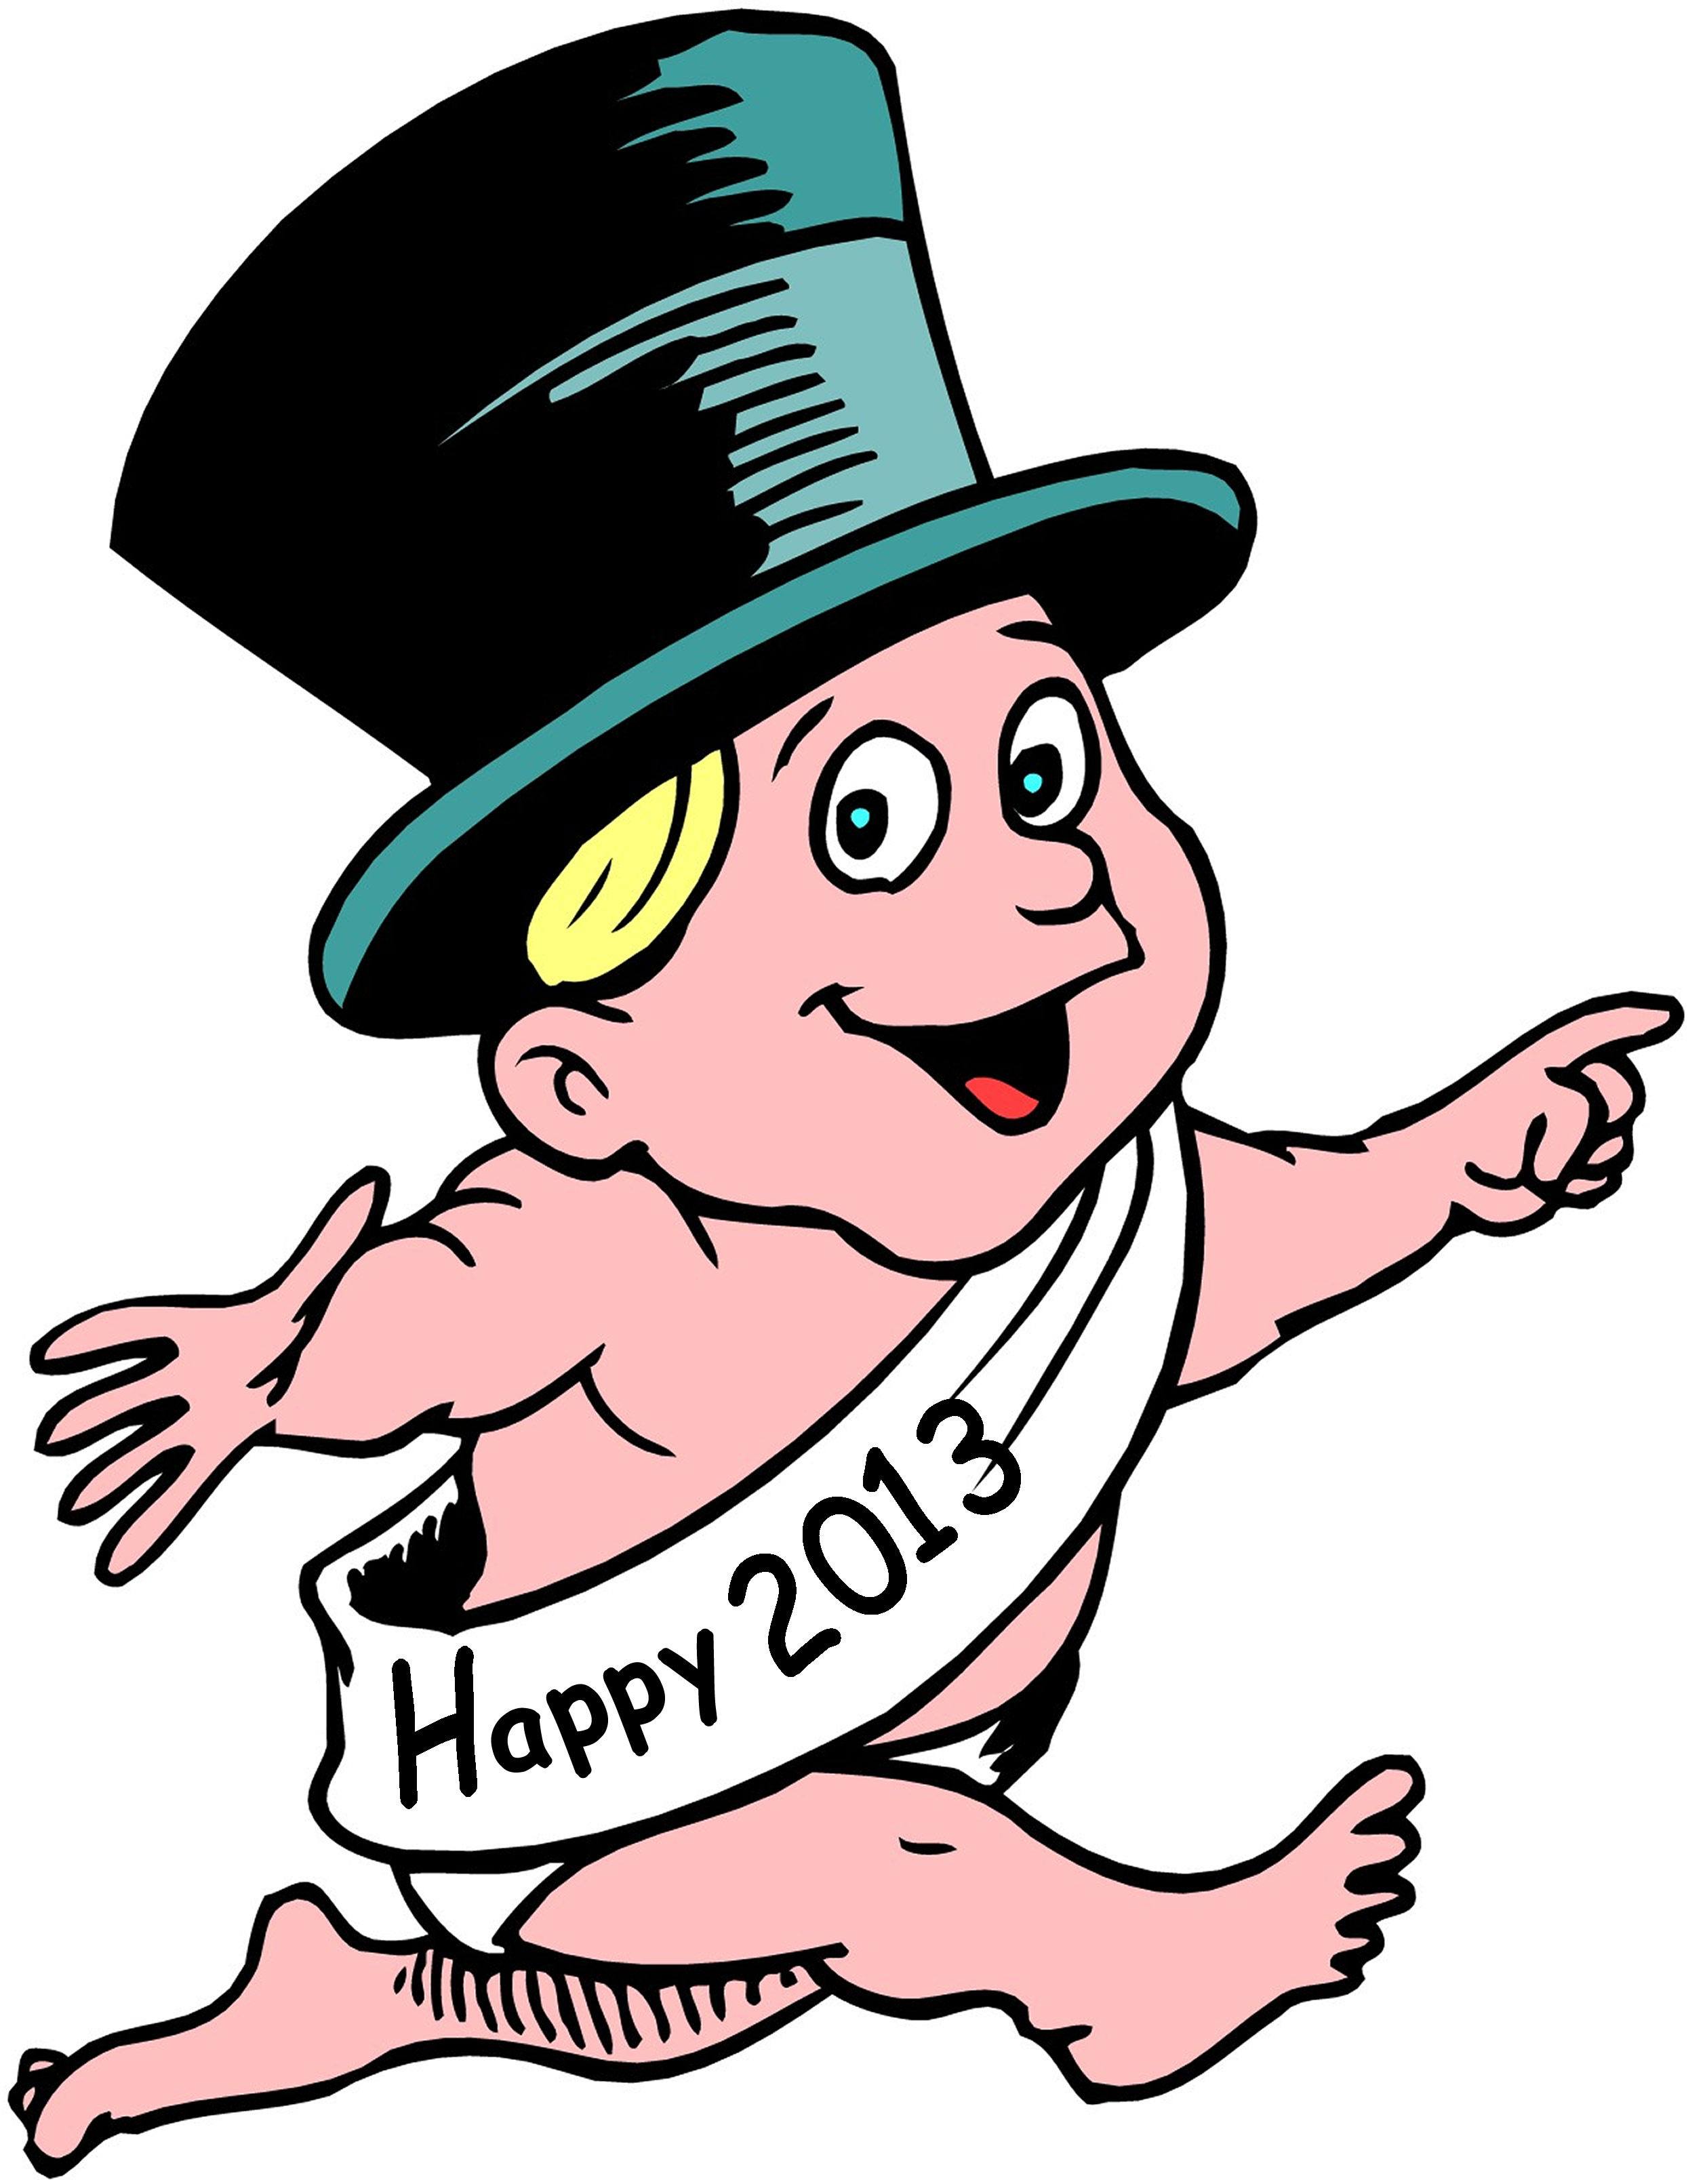 New Year 2013 14 Graphics Clipart   New Year 2013 And 2014 Graphics